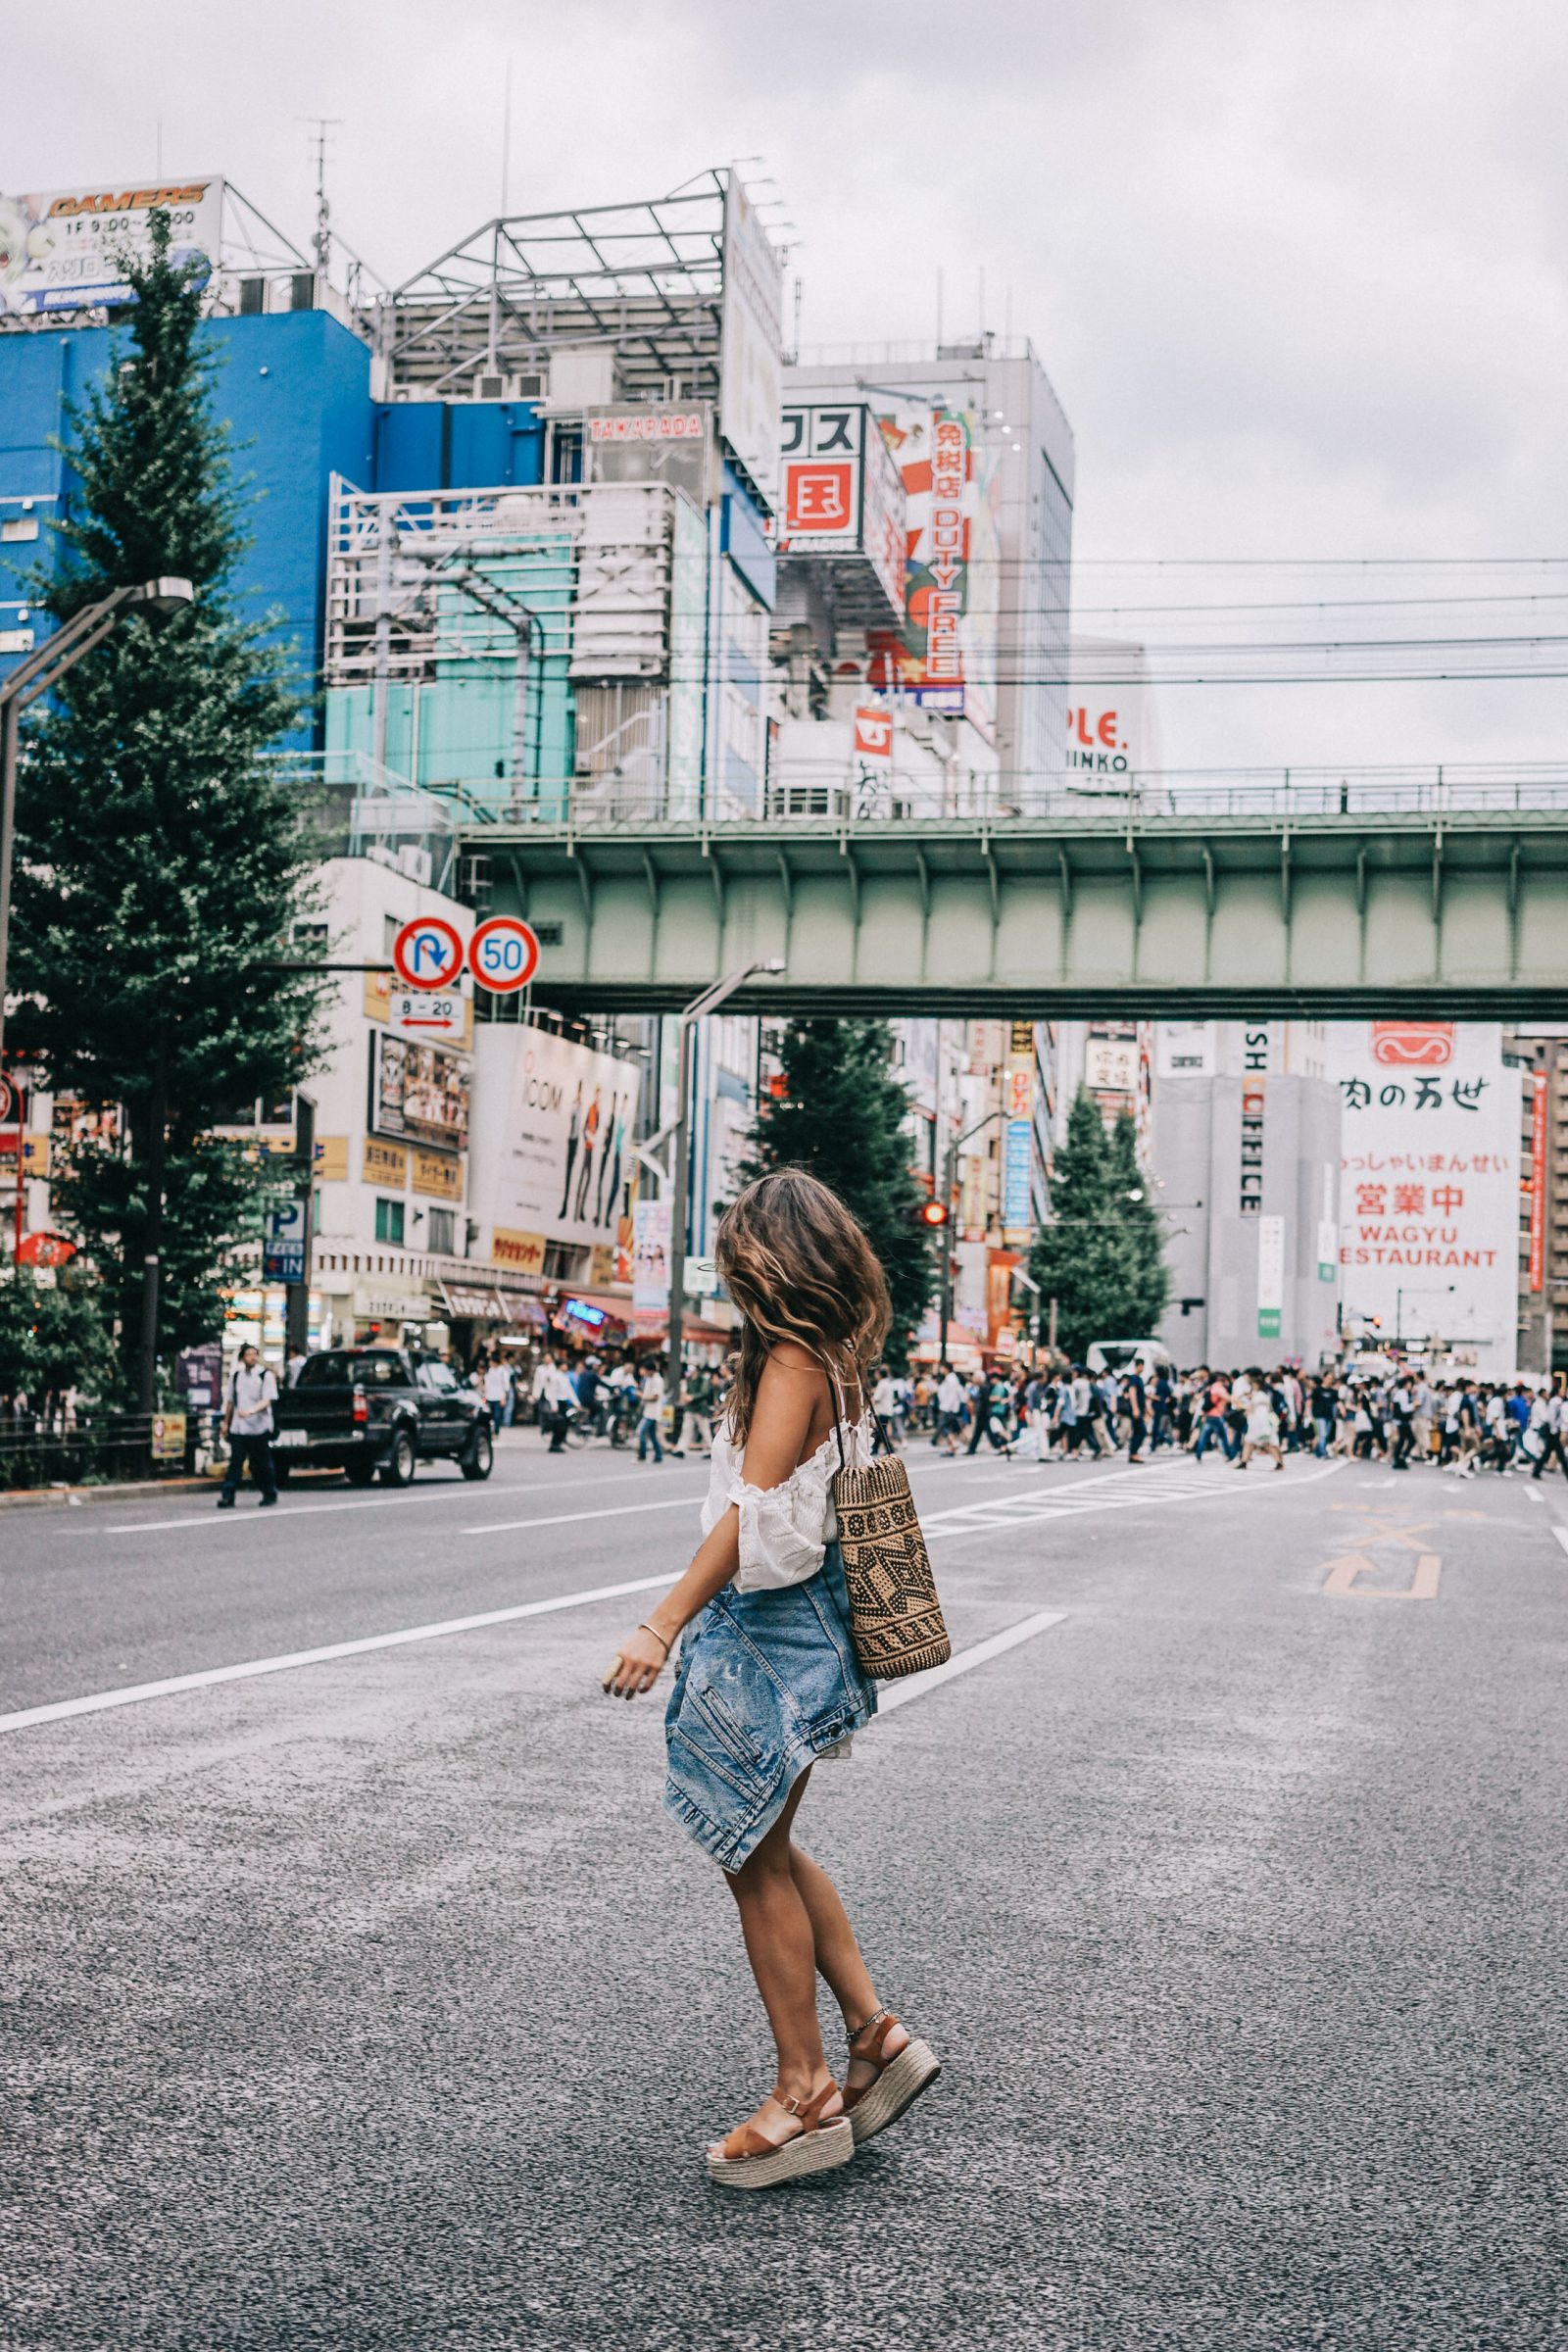 tokyo_travel_guide-outfit-collage_vintage-street_style-lovers_and_friends_jumpsuit-white_outfit-espadrilles-backpack-levis_denim_jacket-akihabara-123